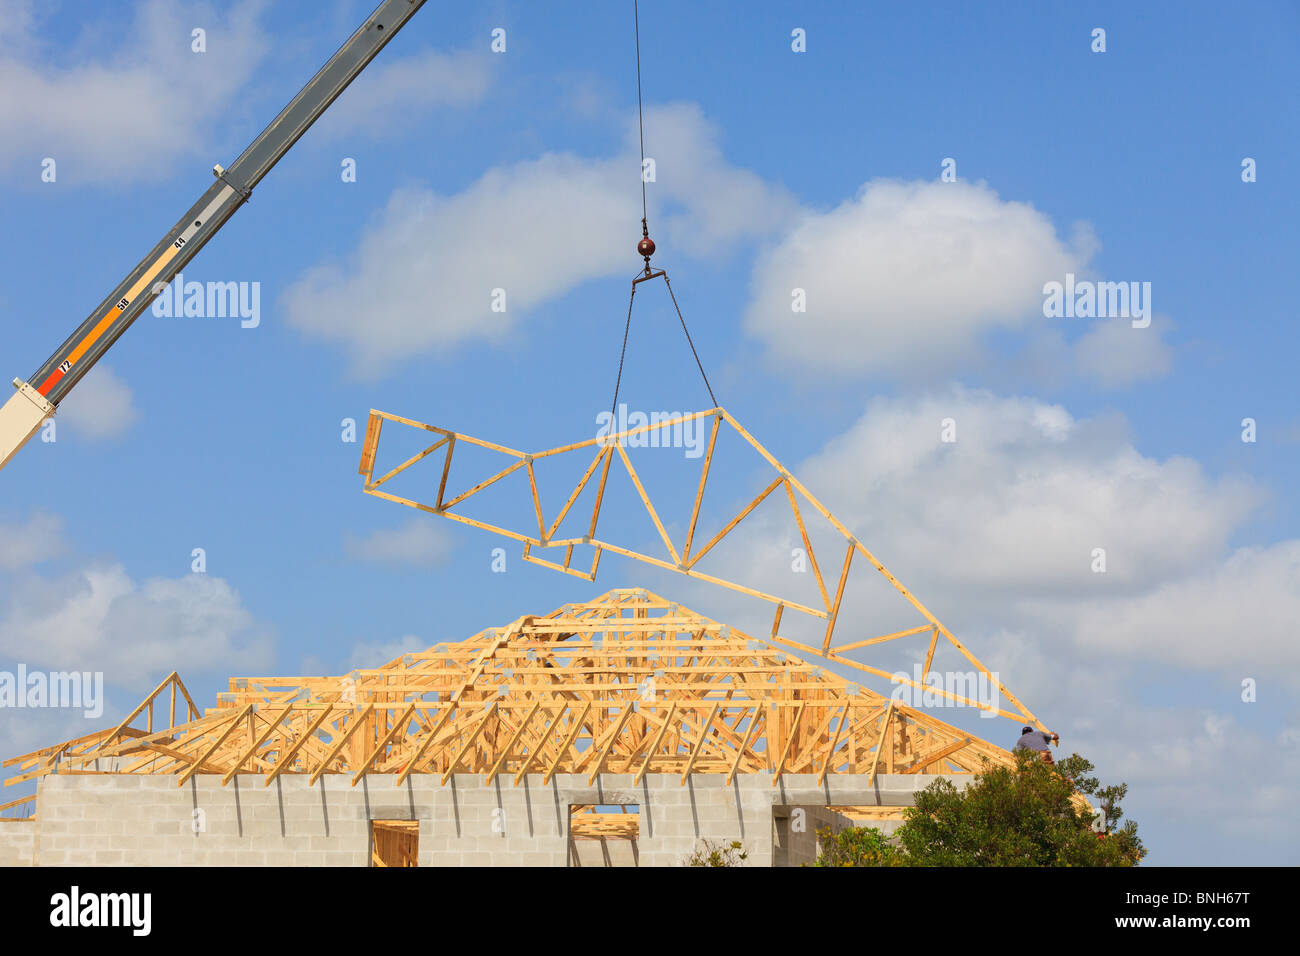 Roof Truss hanging from a crane being installed onto a new roof. Blue sky with clouds in background. Stock Photo